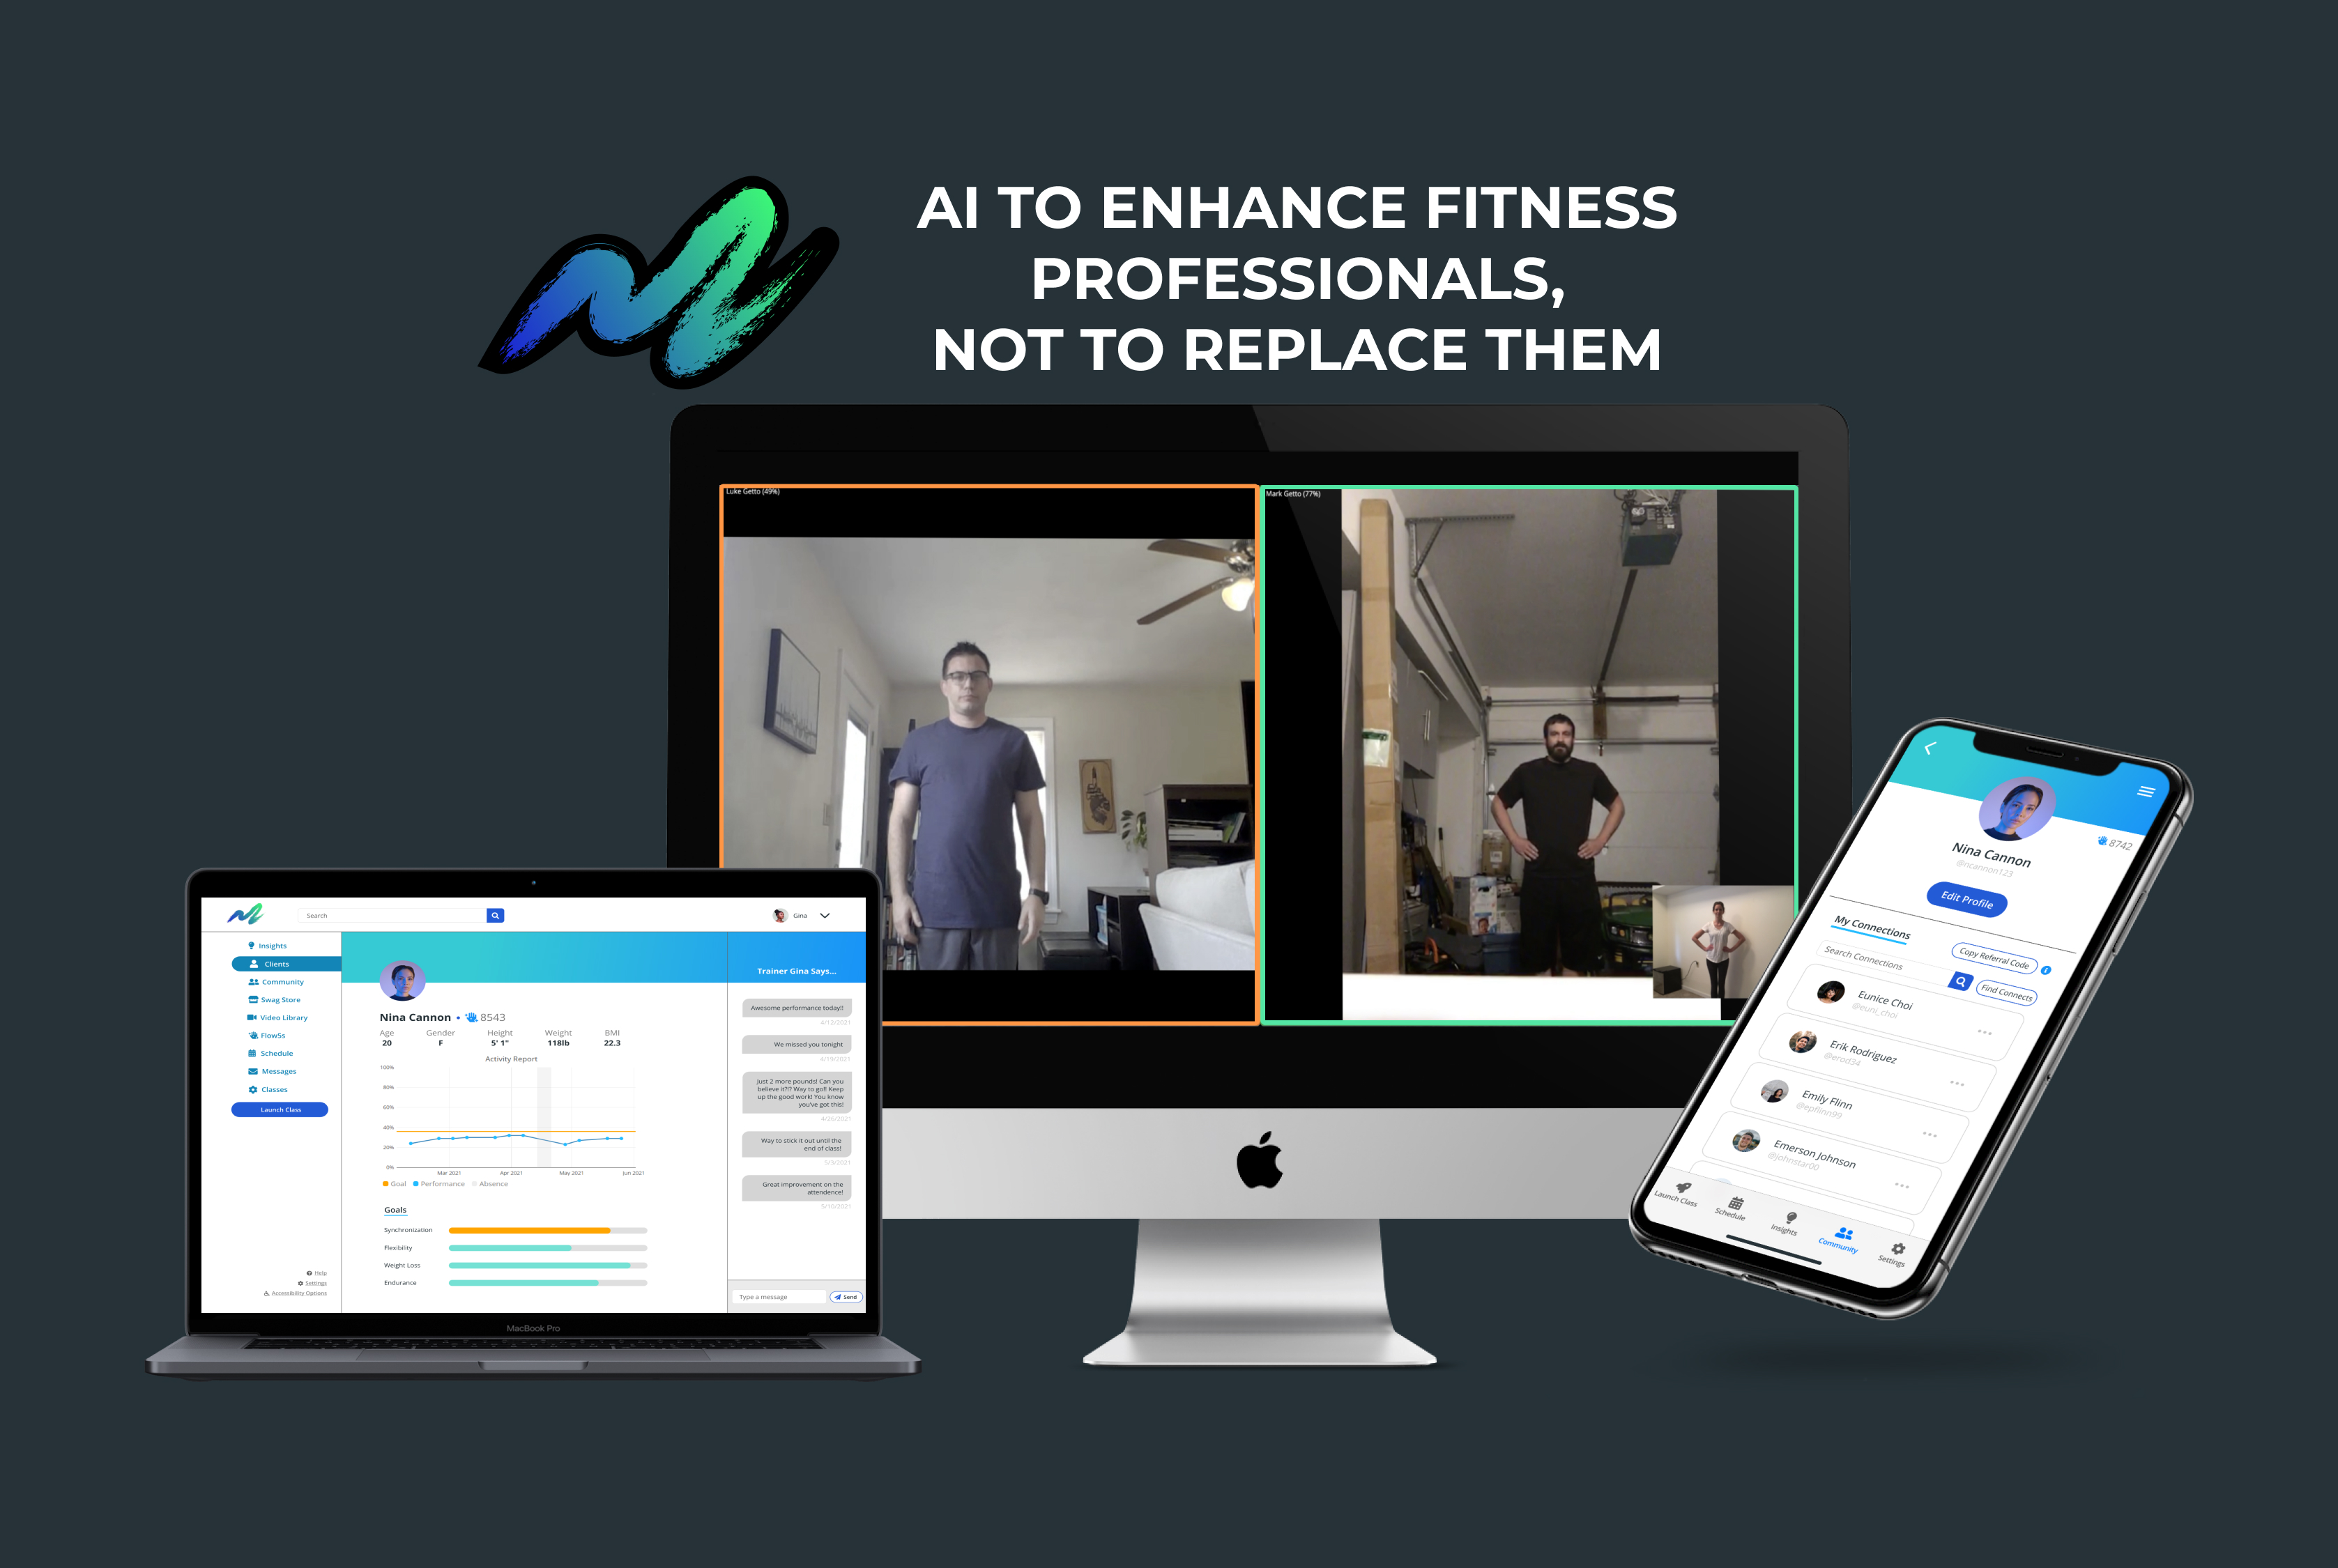 Artificial Intelligence to Enhance Fitness Professionals, Not to Replace Them